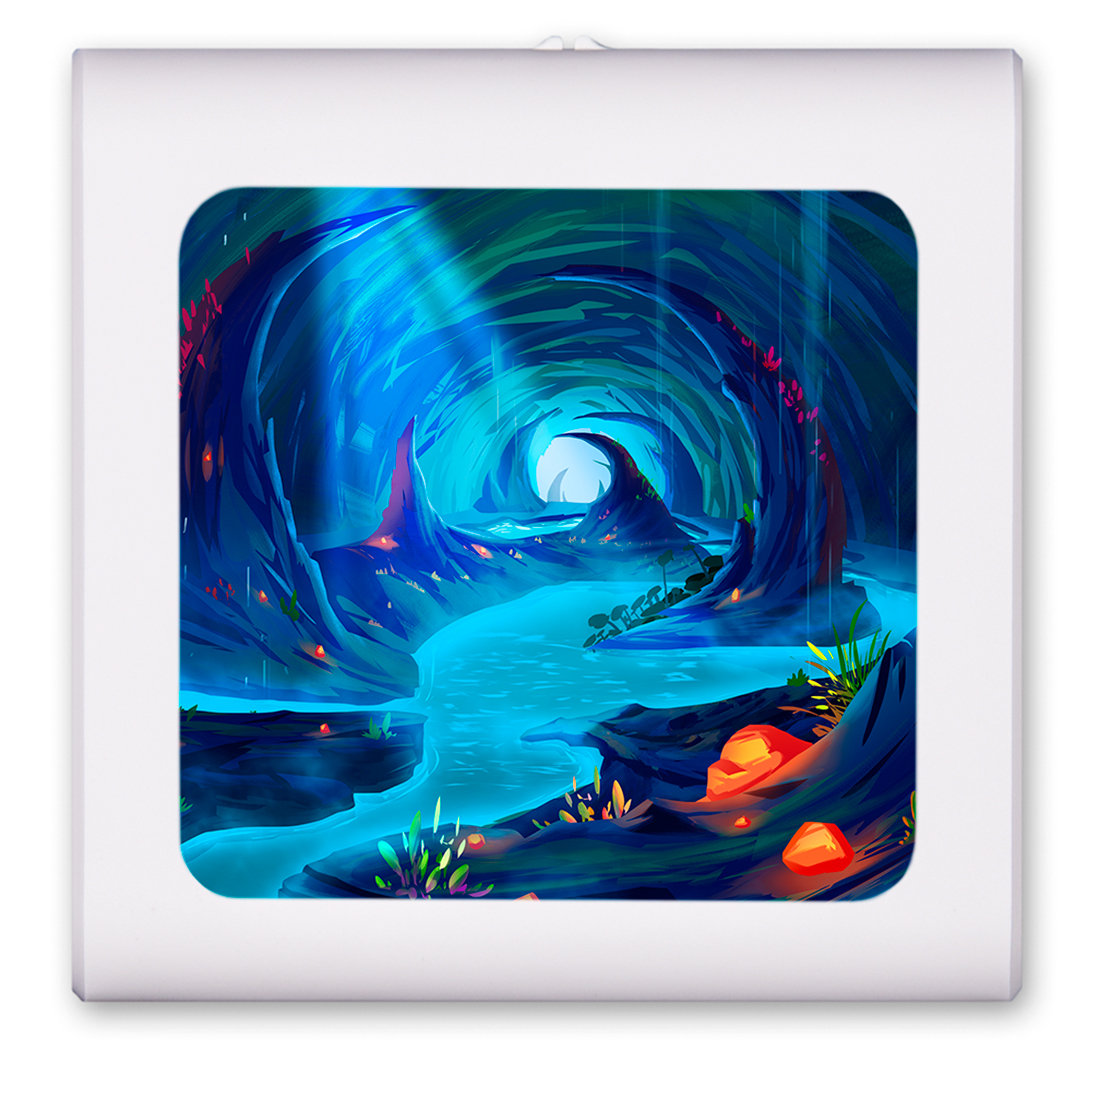 Whimsical Cave - #2744